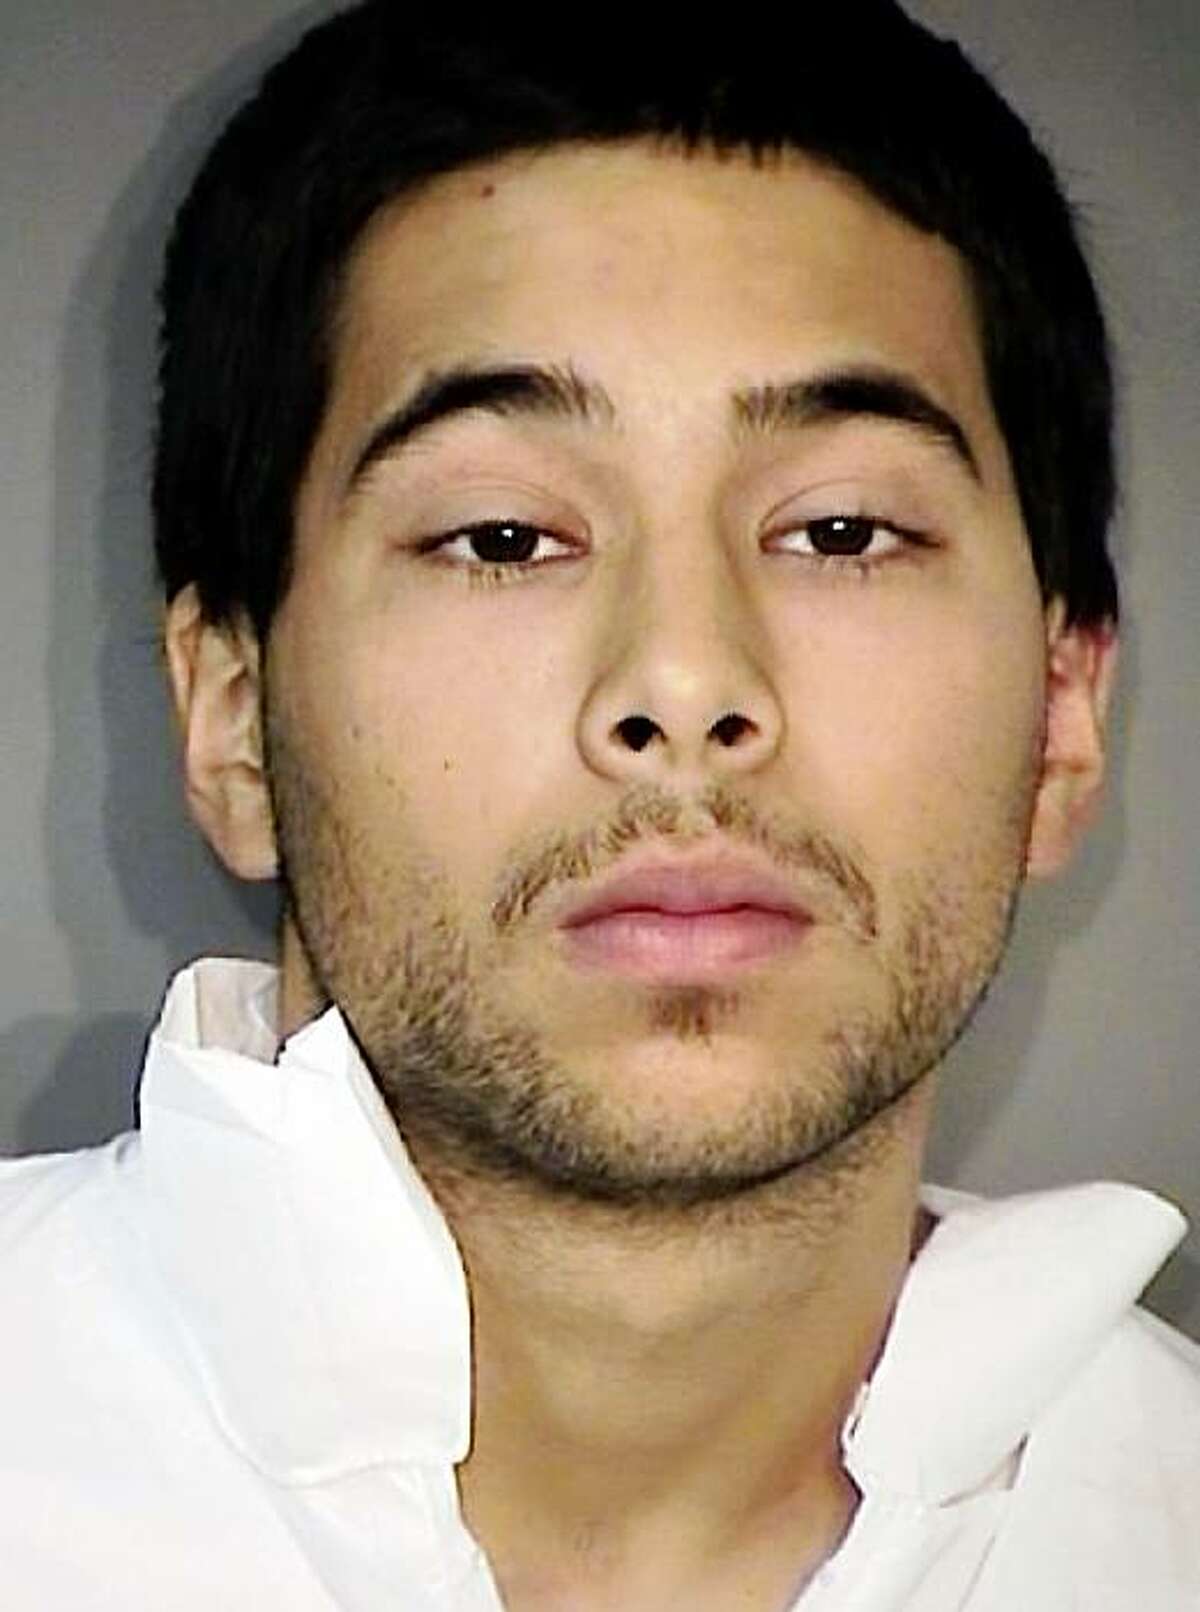 ** CORRECTS DATE OF INCIDENT TO SATURDAY, OCT. 24 ** This undated booking photo provided by the Richmond Police Department shows Manuel Ortega. Ortega, 19, is charged with rape, robbery and kidnapping in connection with the assault of a 15-year-old girl following a Richmond High School homecoming dance on Saturday night, Oct. 24, 2009. According to police, the attack lasted more than two hours and was witnessed by as many as 20 people. (AP Photo/Richmond Police Department)